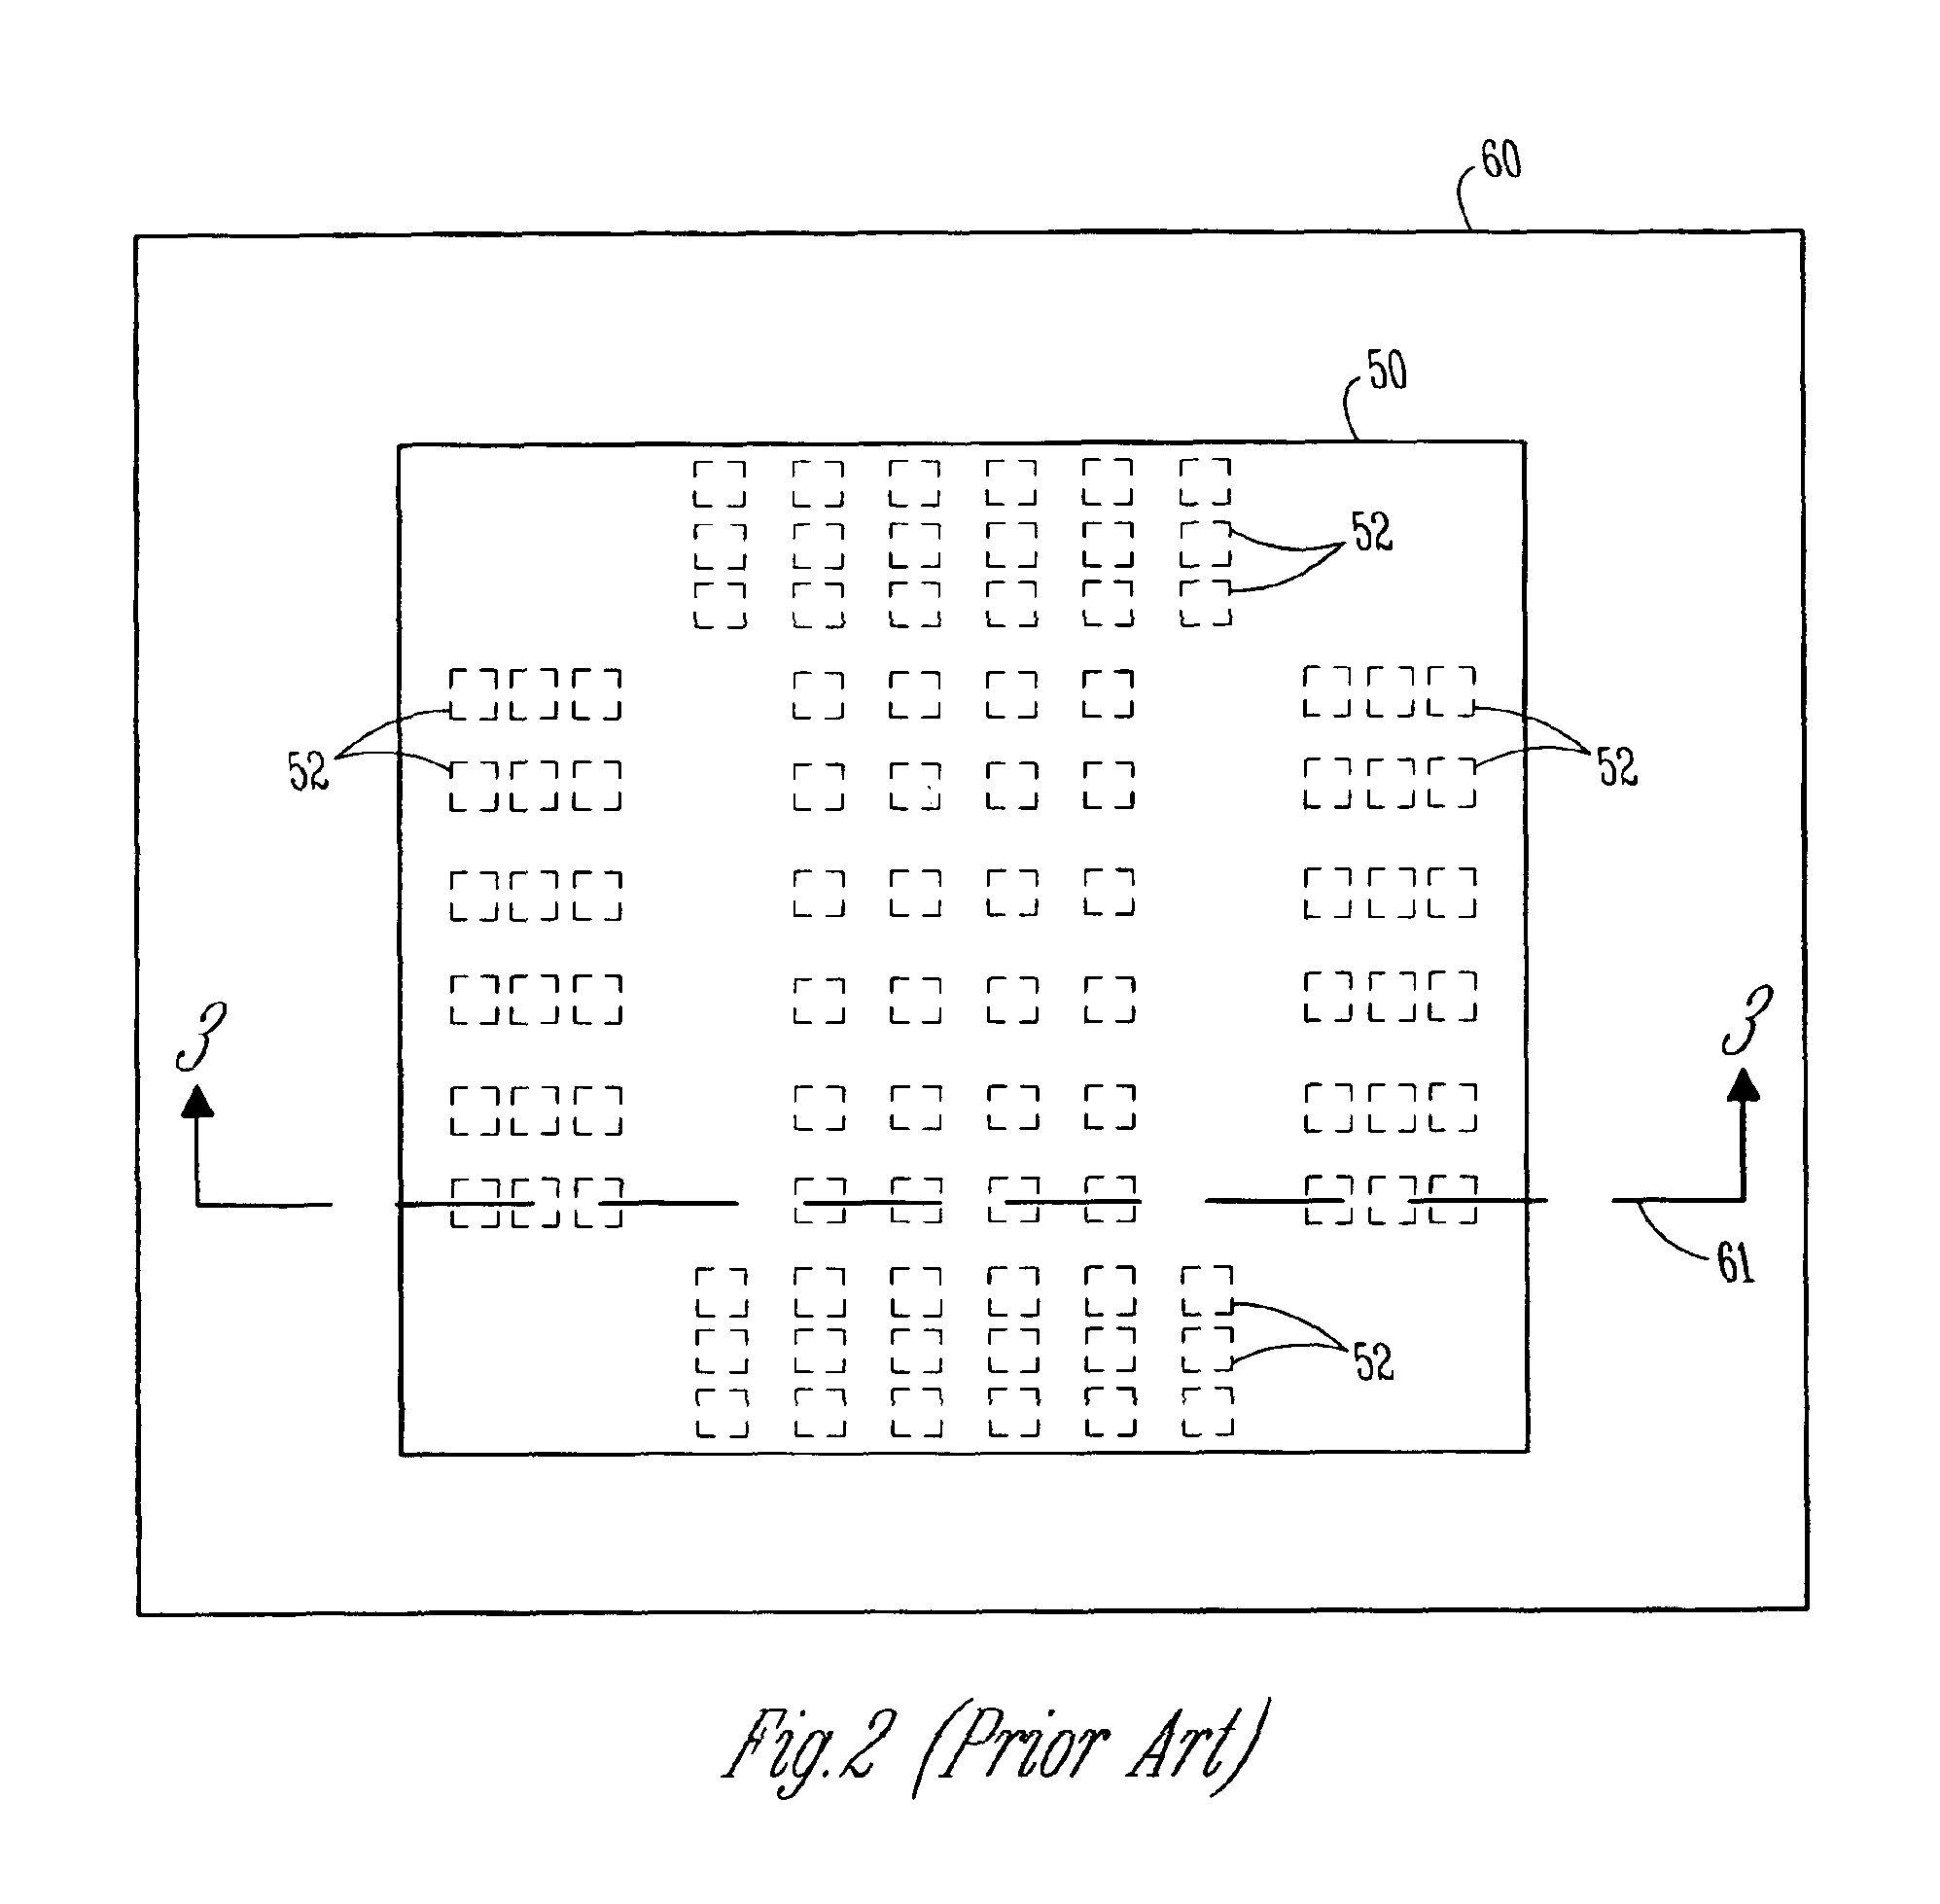 Selectable decoupling capacitors for integrated circuit and methods of use